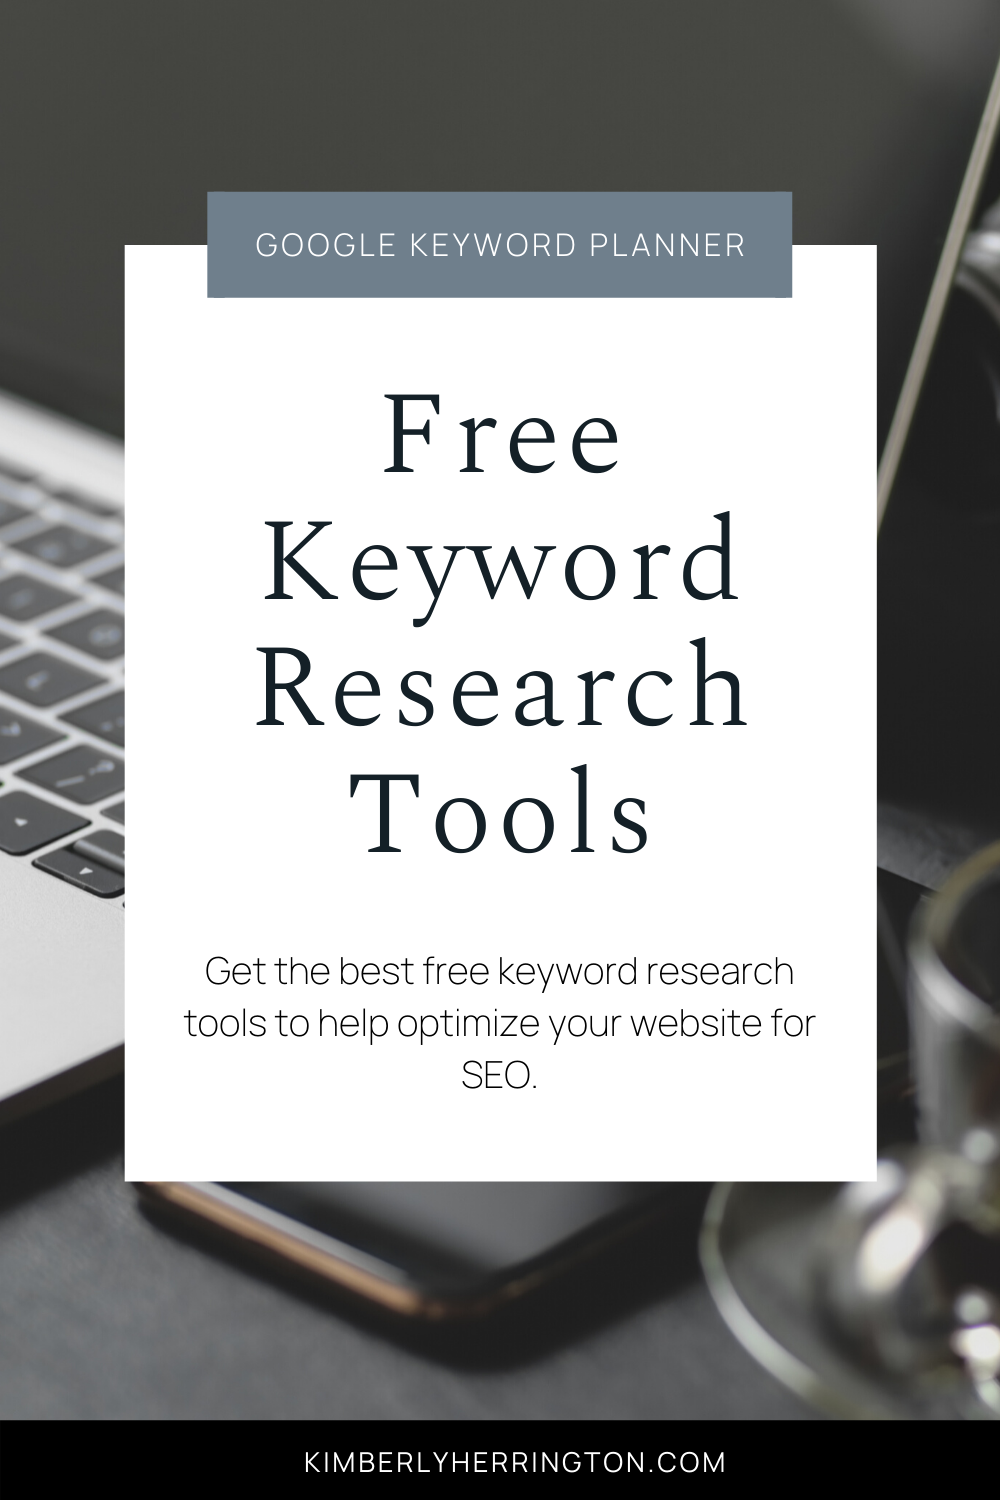 The best keyword research tools for SEO